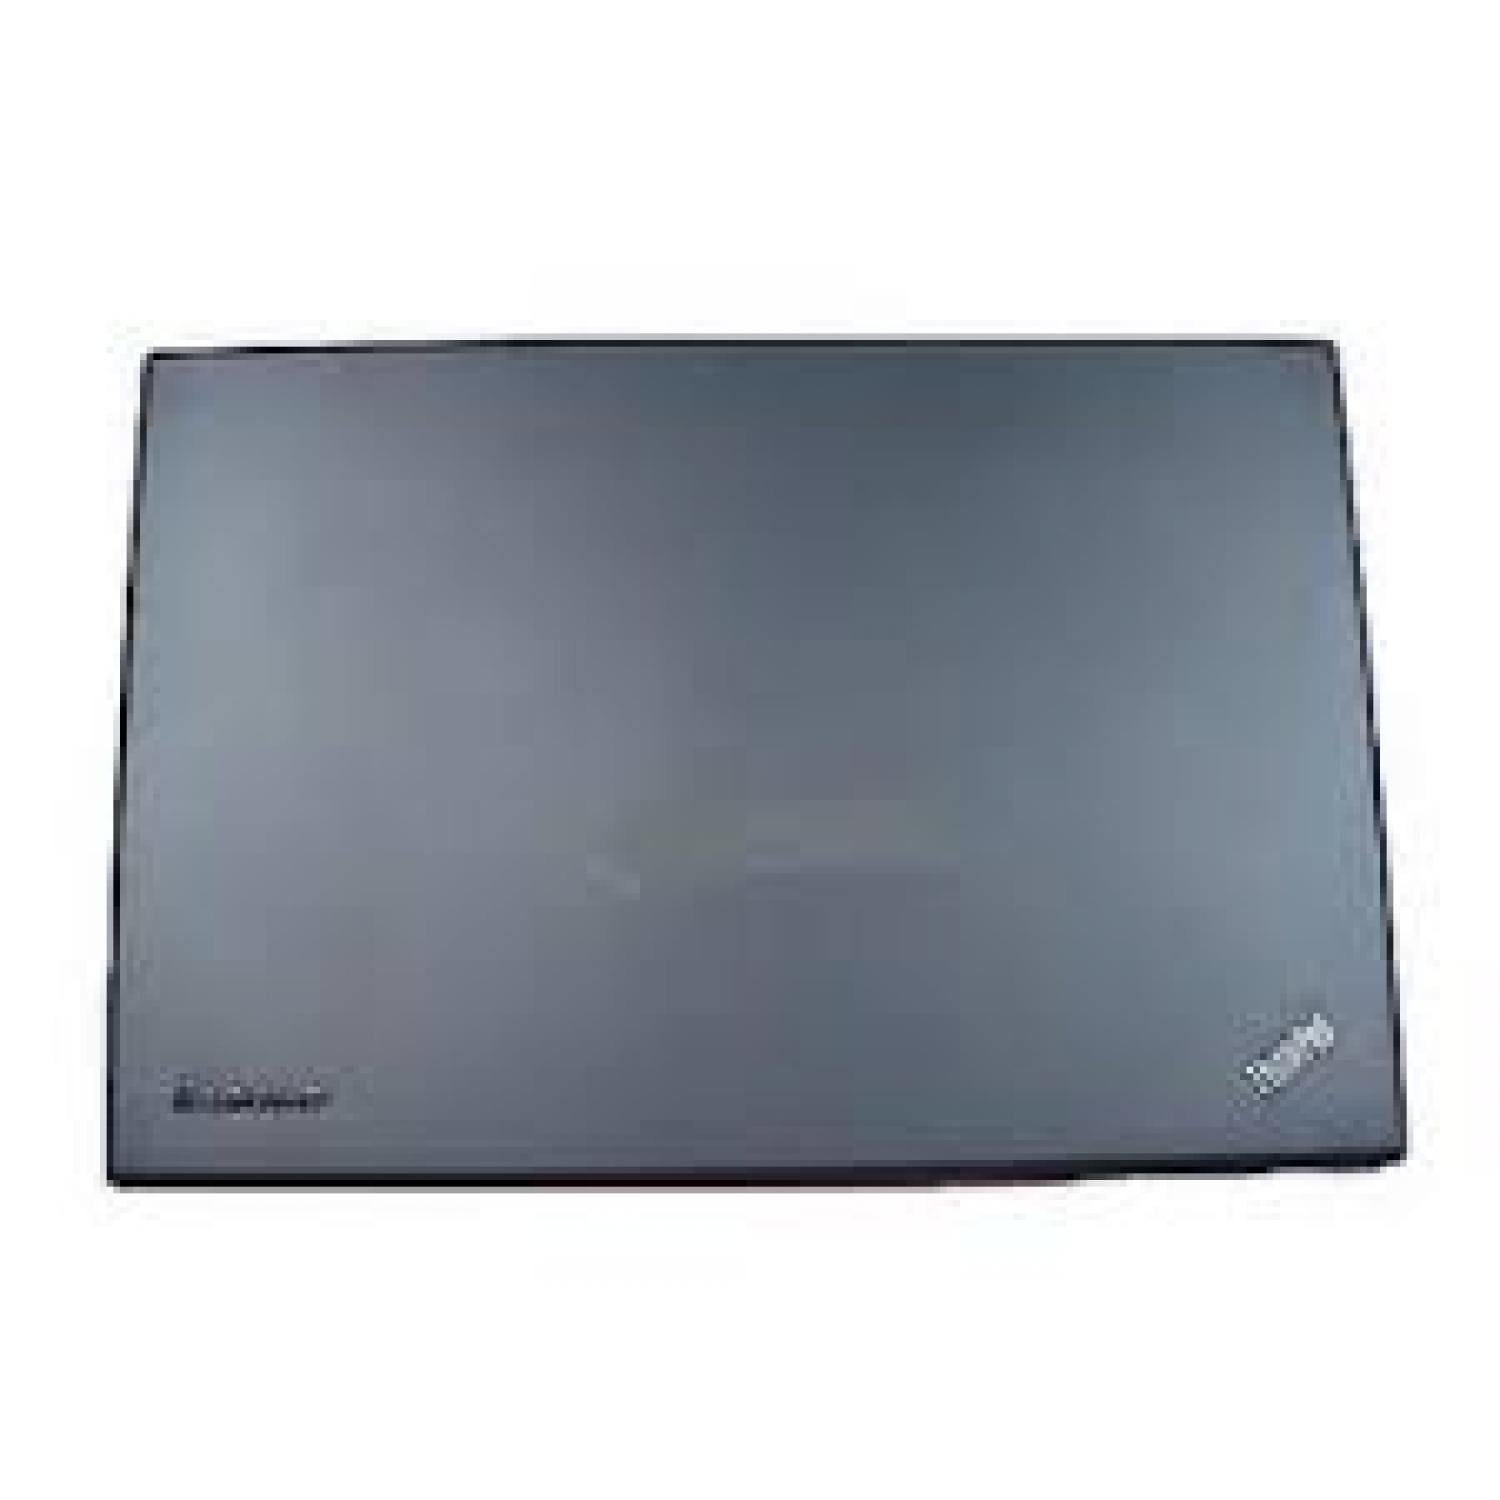 Lenovo Ideapad G400 G400s OEM LCD Back Cover Top Lid P/N FAYC000800